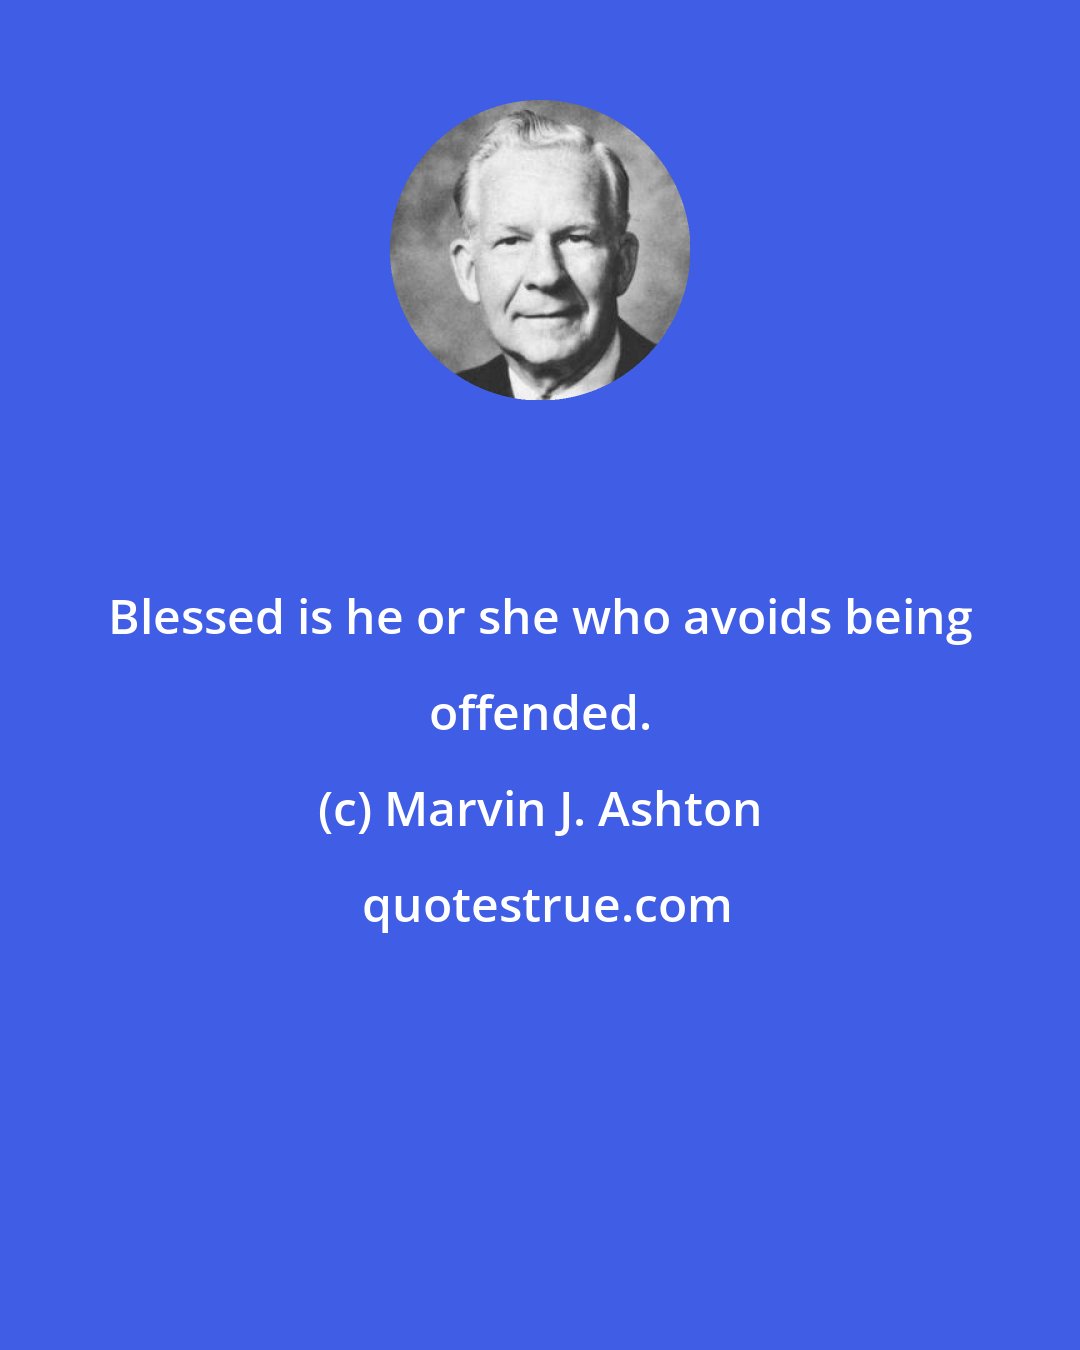 Marvin J. Ashton: Blessed is he or she who avoids being offended.